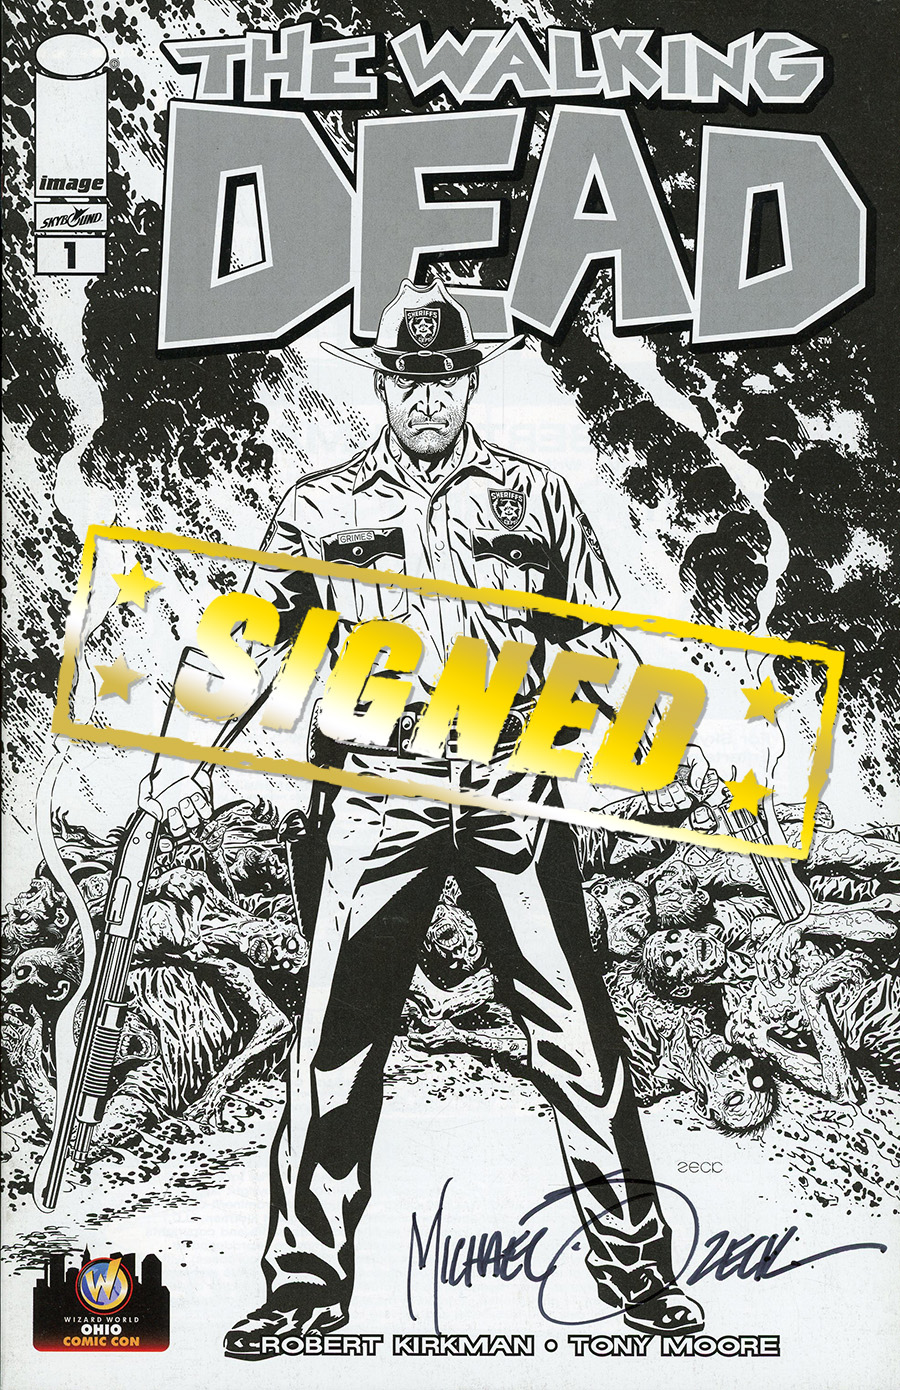 Walking Dead #1 Cover Z-Z-D Wizard World Ohio Exclusive Mike Zeck Black & White Variant Cover Signed By Mike Zeck Without Certificate